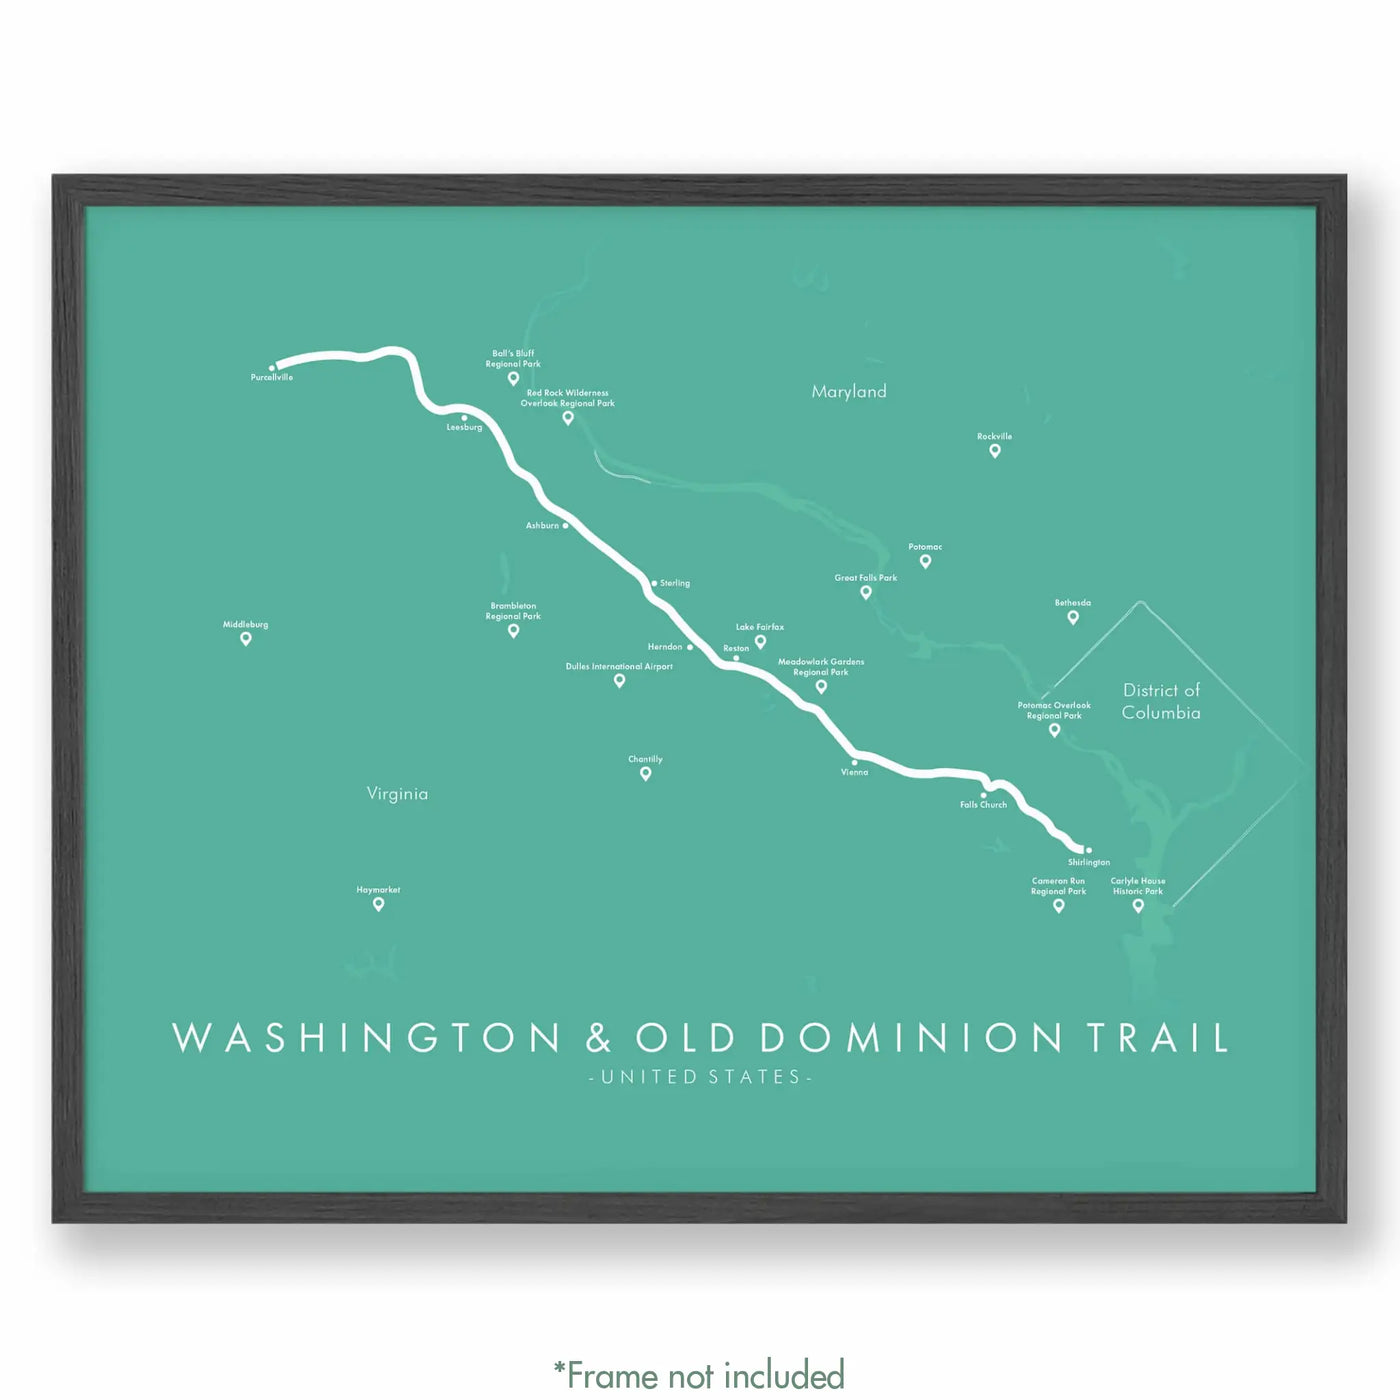 Trail Poster of Washington & Old Dominion Trail - Teal